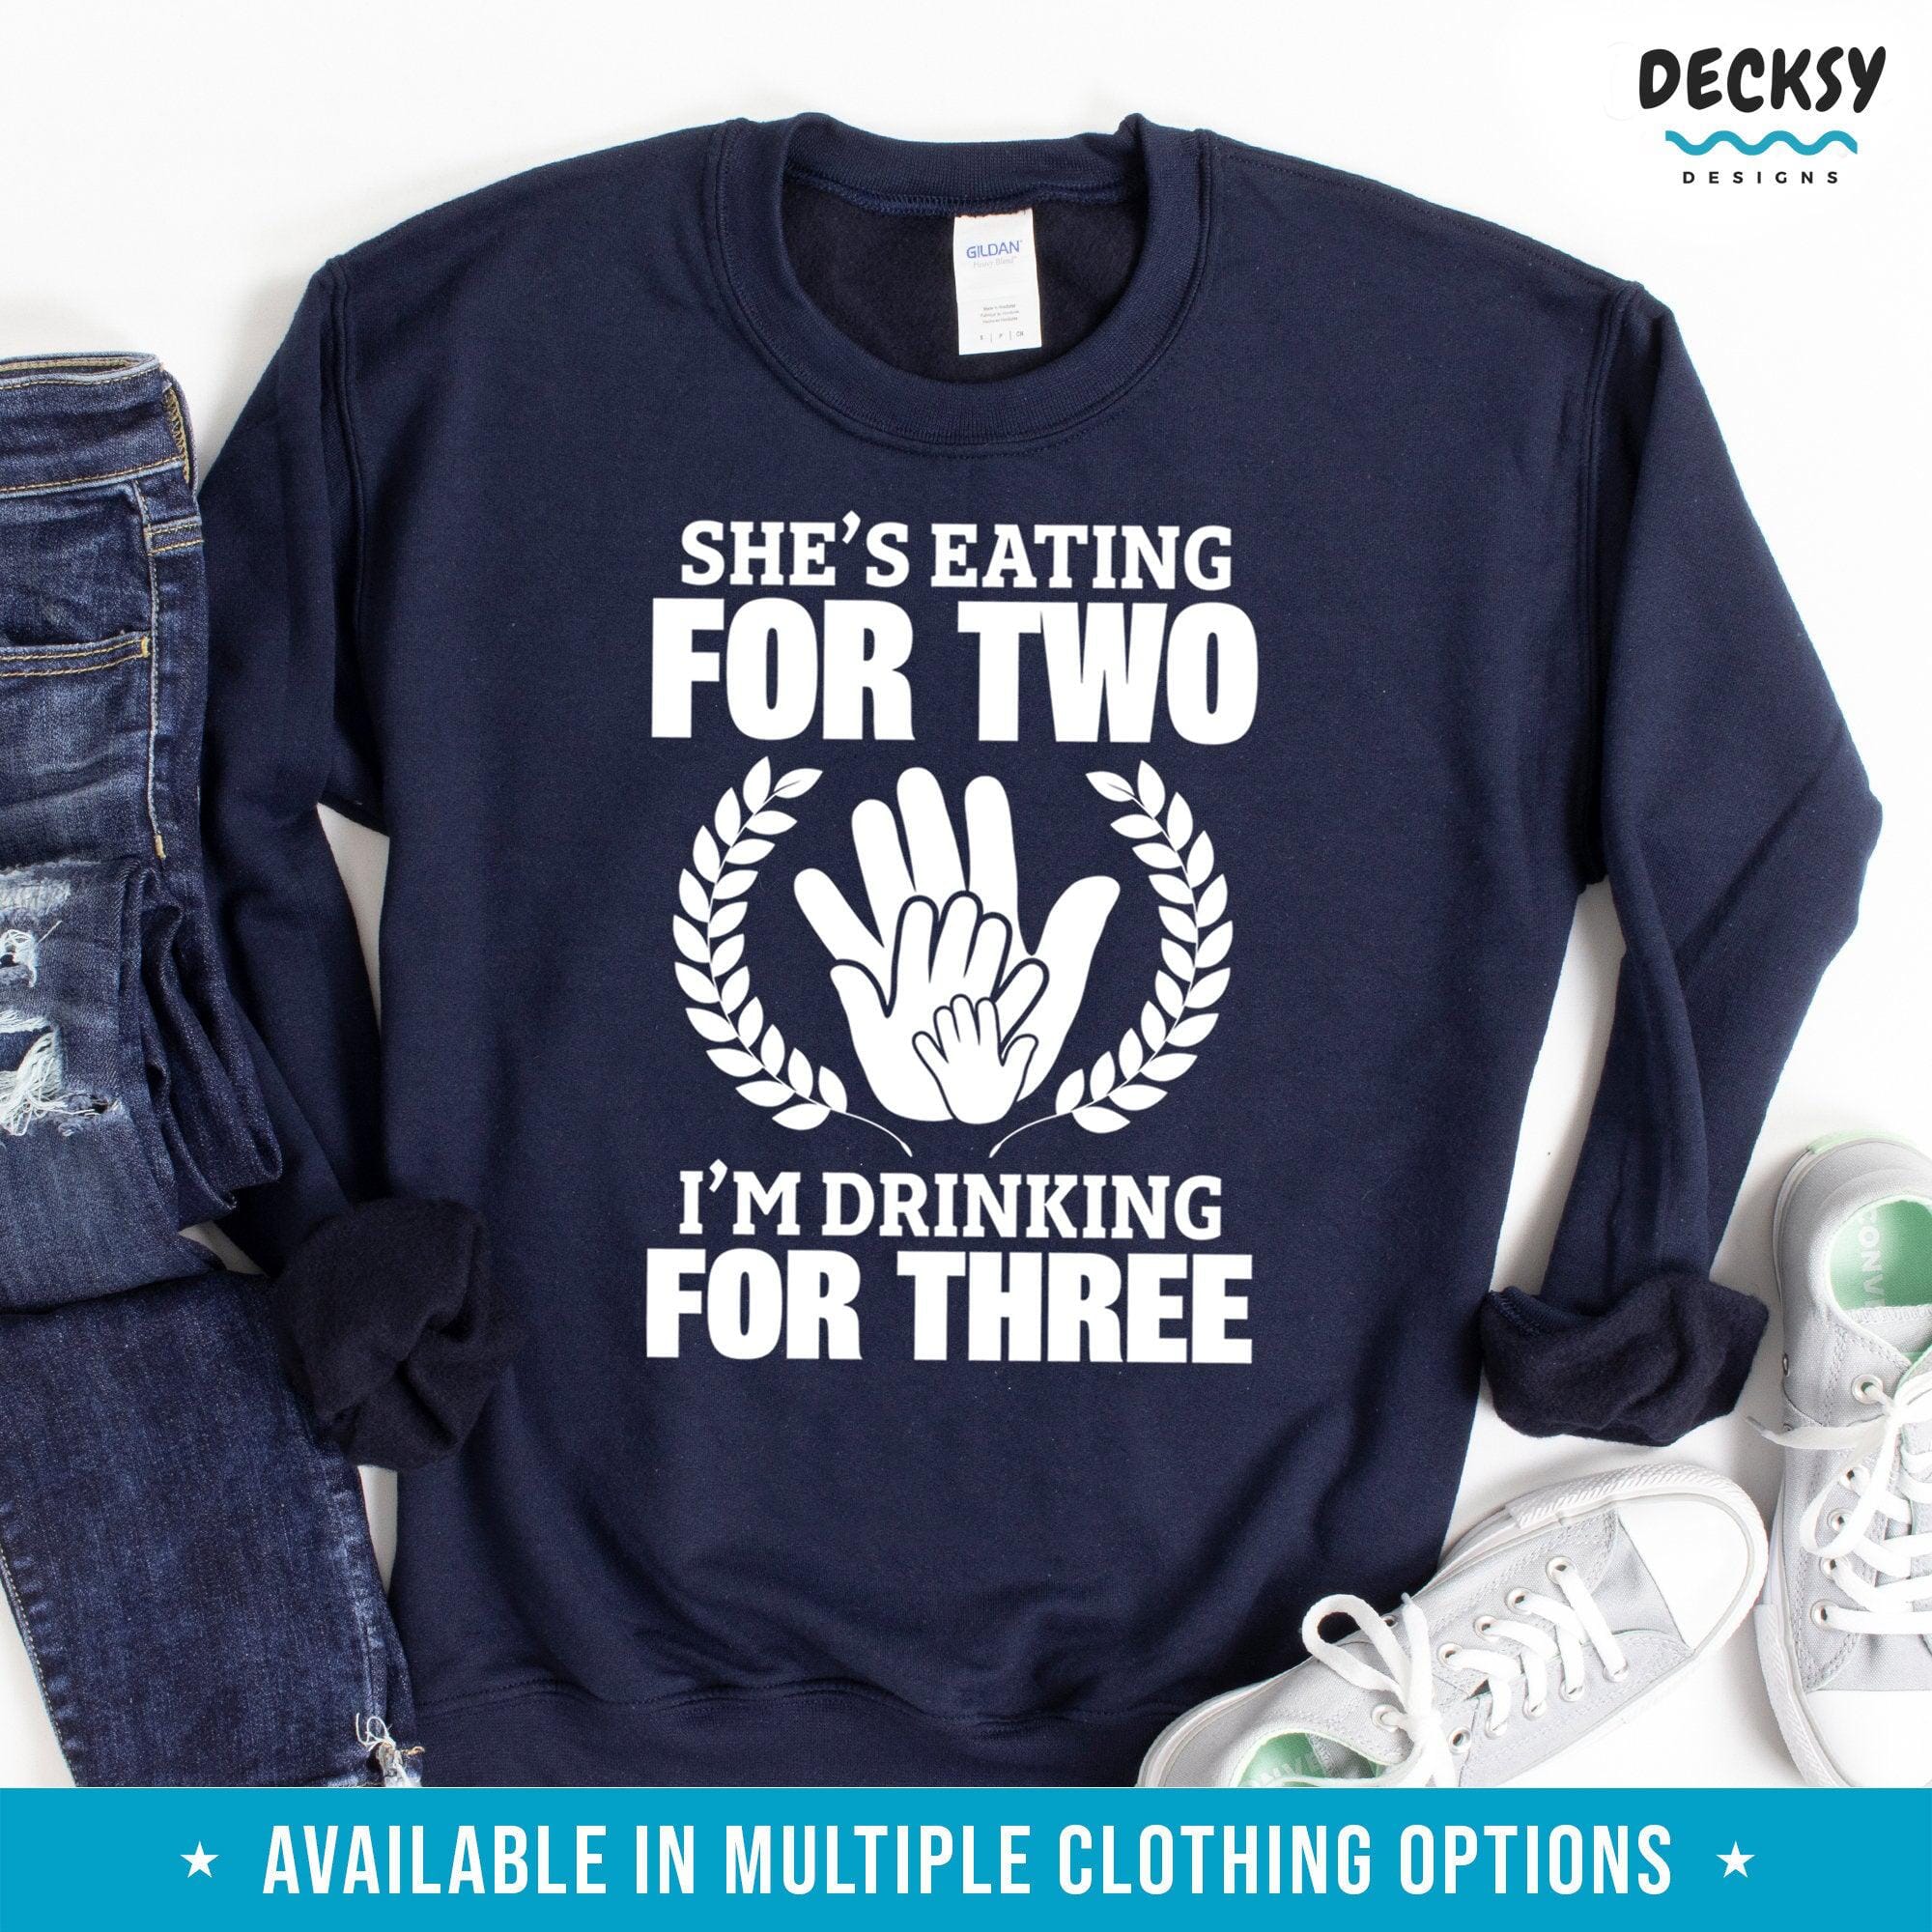 Dad To Be Shirt, Gift from Bump-Clothing:Gender-Neutral Adult Clothing:Tops & Tees:T-shirts:Graphic Tees-DecksyDesigns